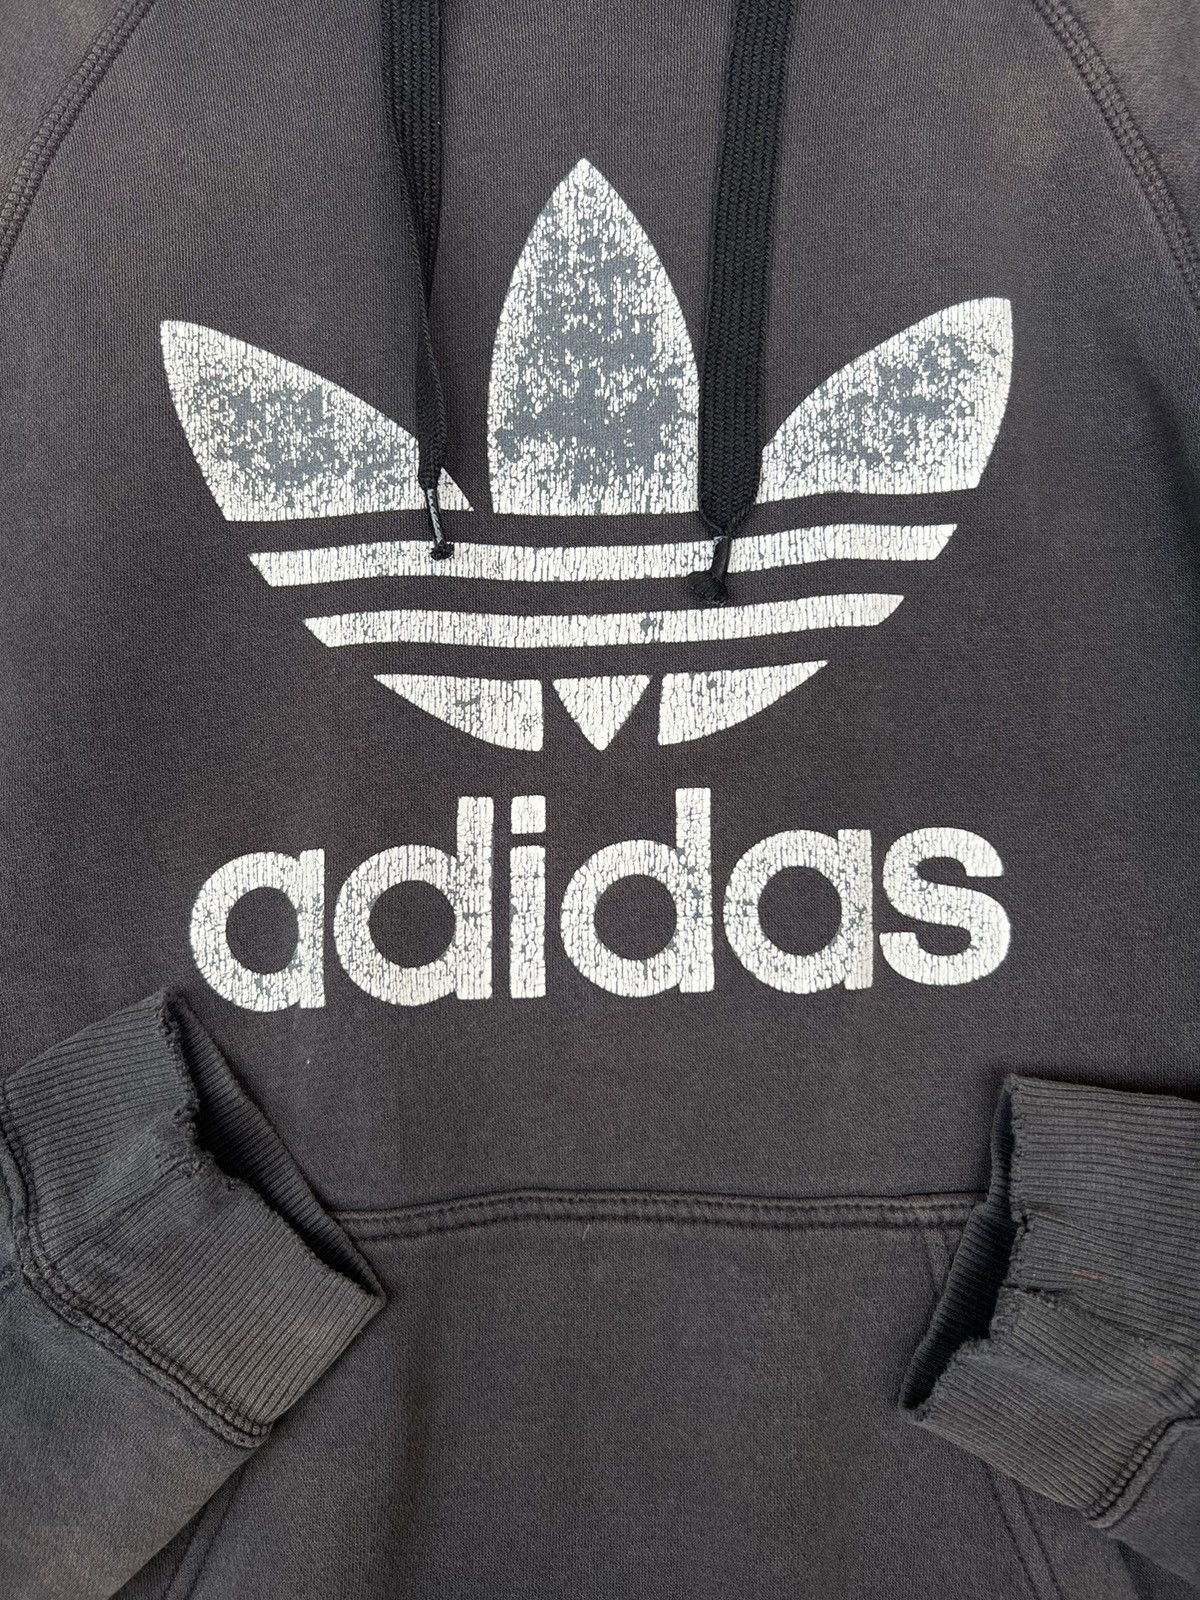 Adidas Distressed Ripped Sunfaded Hoodie - 8